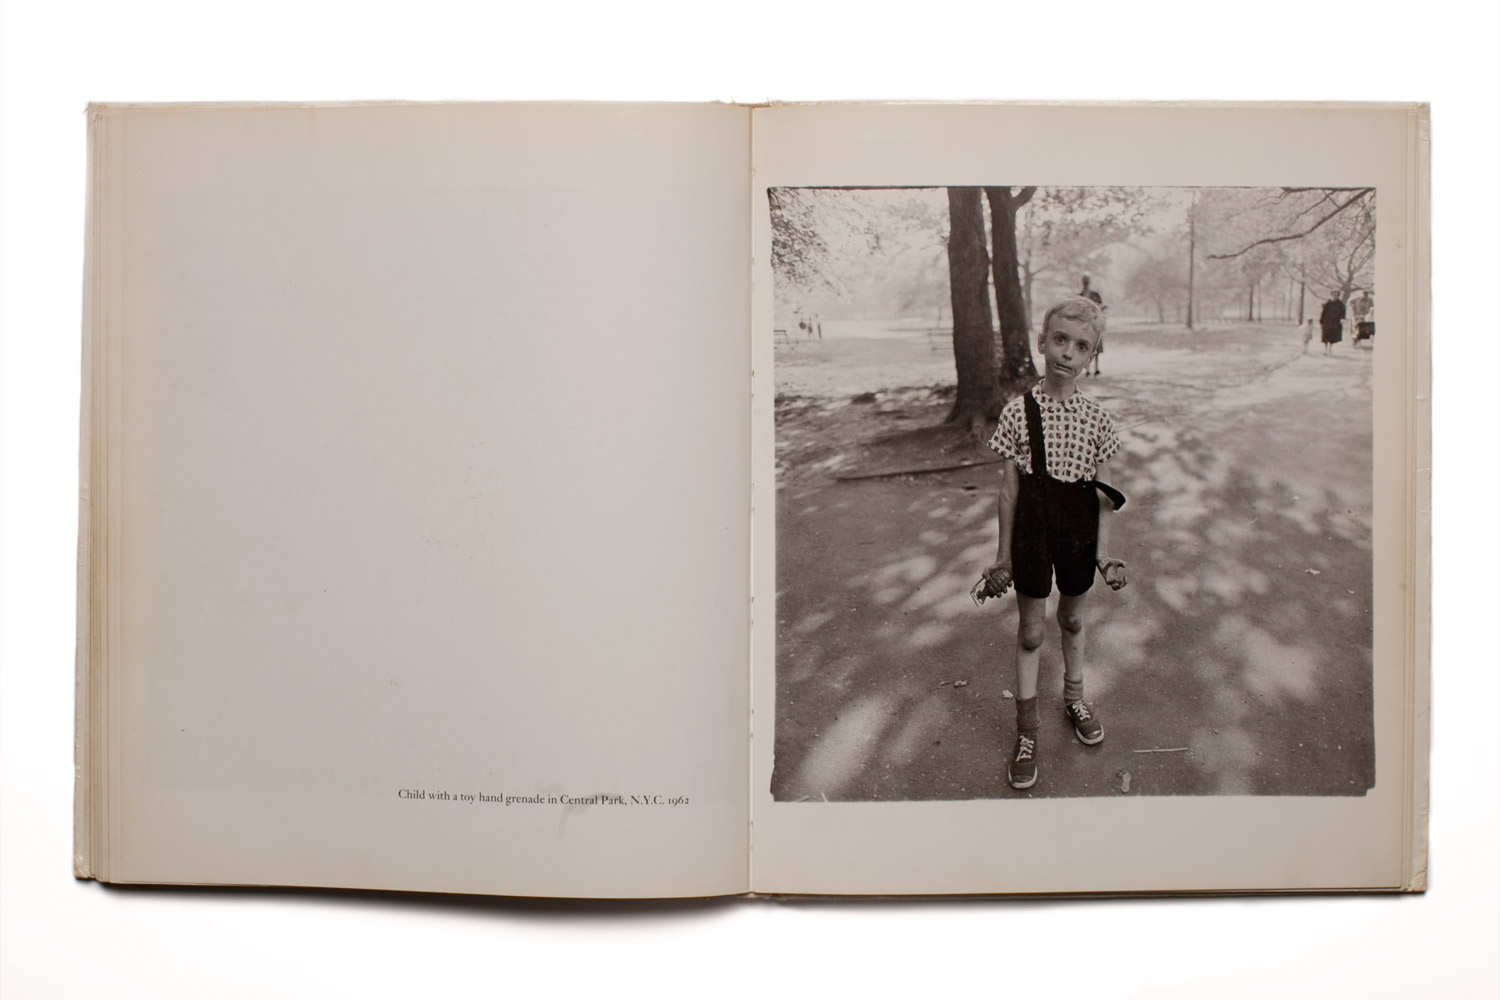 The timeless book includes the seminal images for which Diane Arbus is now remembered.